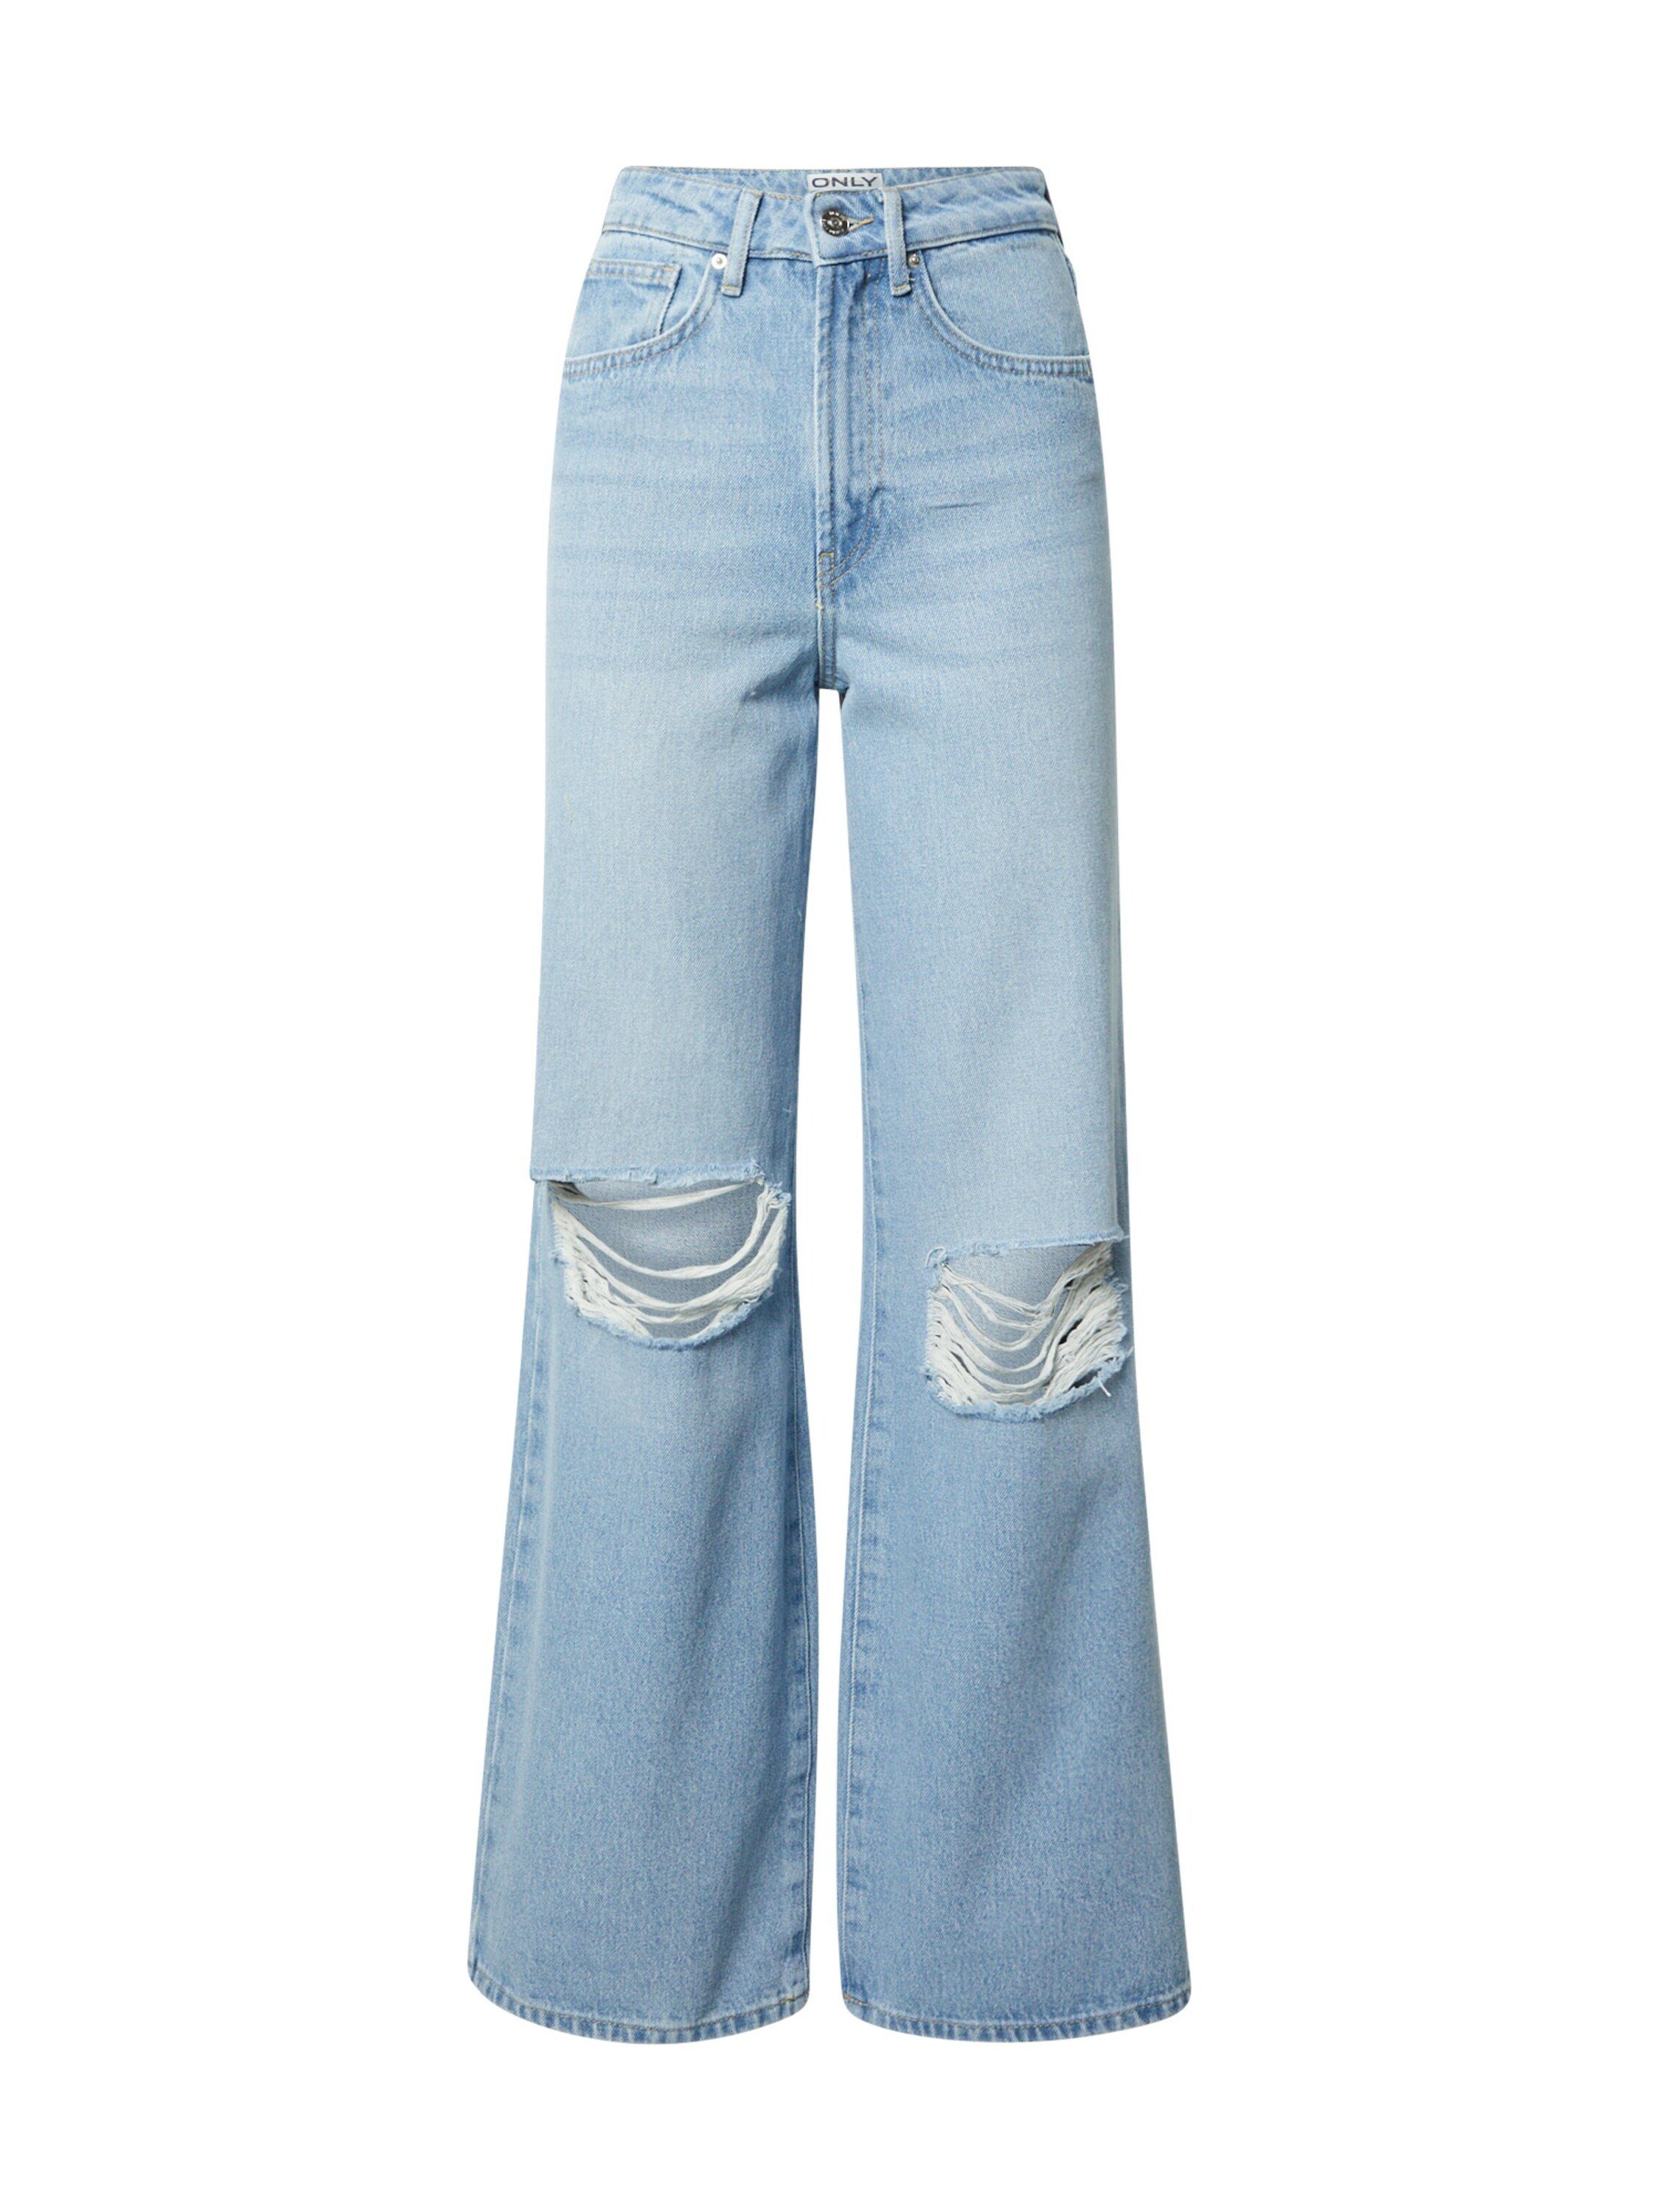 Plain/ohne (1-tlg) ONLY HOPE Details Weite Jeans